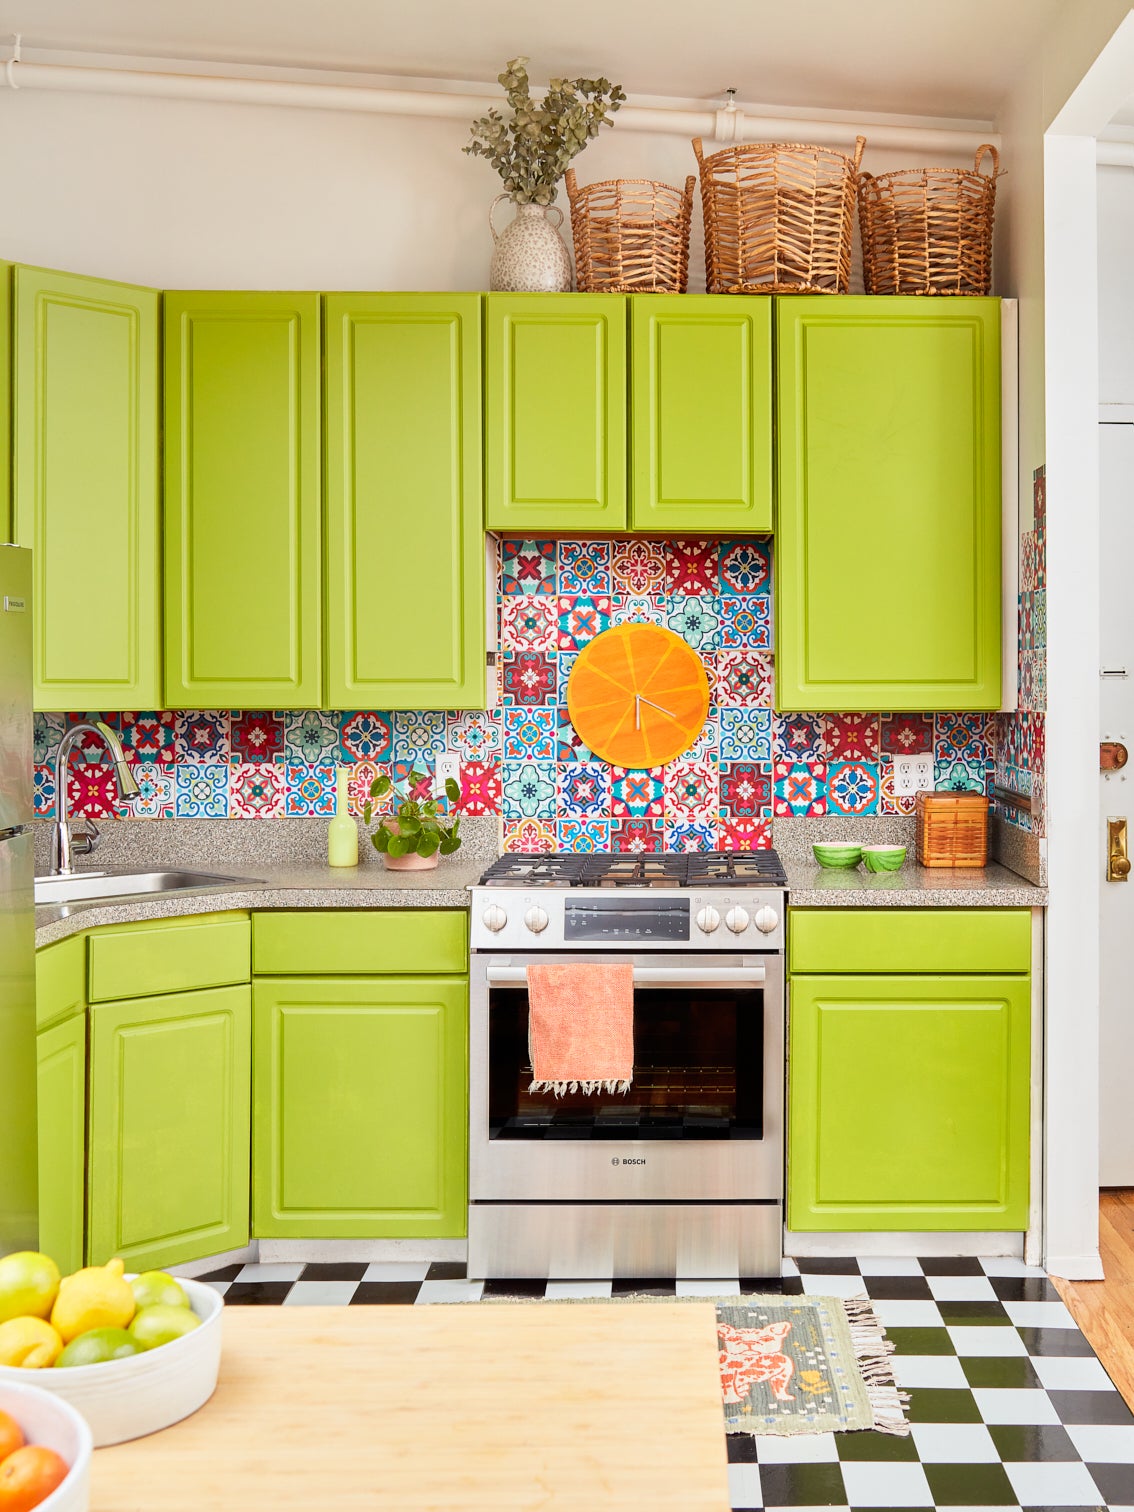 I Designed a Lime Green Kitchen That I Love—But My Followers Hate